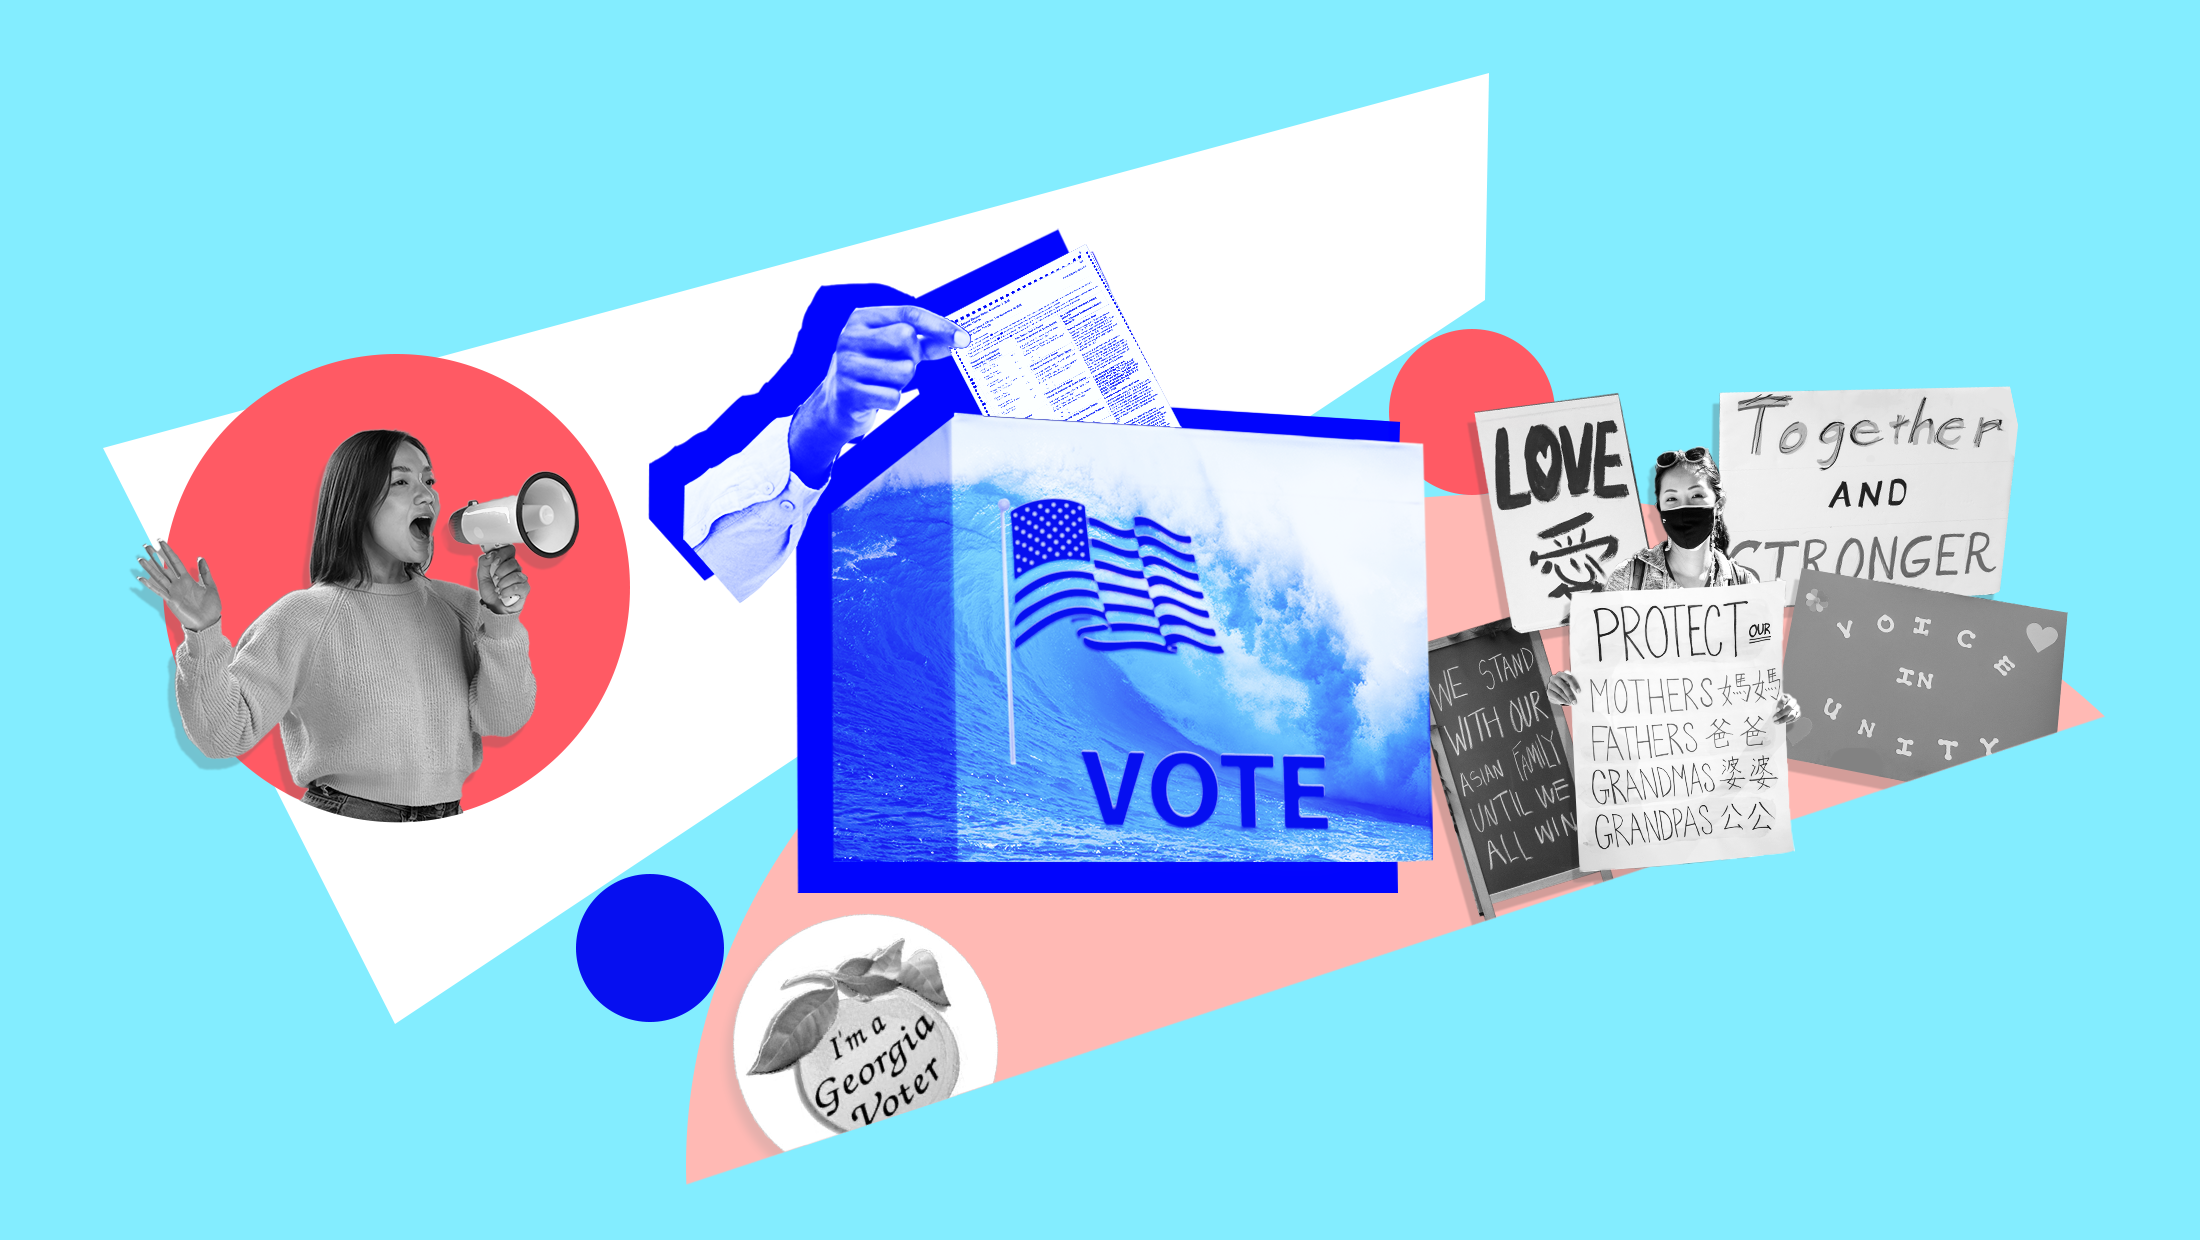 Light blue background with image of blue wave, an American flag and the word "VOTE" laid over a ballot box and someone inserting their ballot into the box, a black and white image of someone speaking into a megaphone, a peach-shaped sticker that reads "I'm a Georgia voter," and signs that read "Together and Stronger," "Protect Our Mothers Fathers Grandmas Grandpas," "We stand with our Asian family until we all win," and "Voice in Unity"